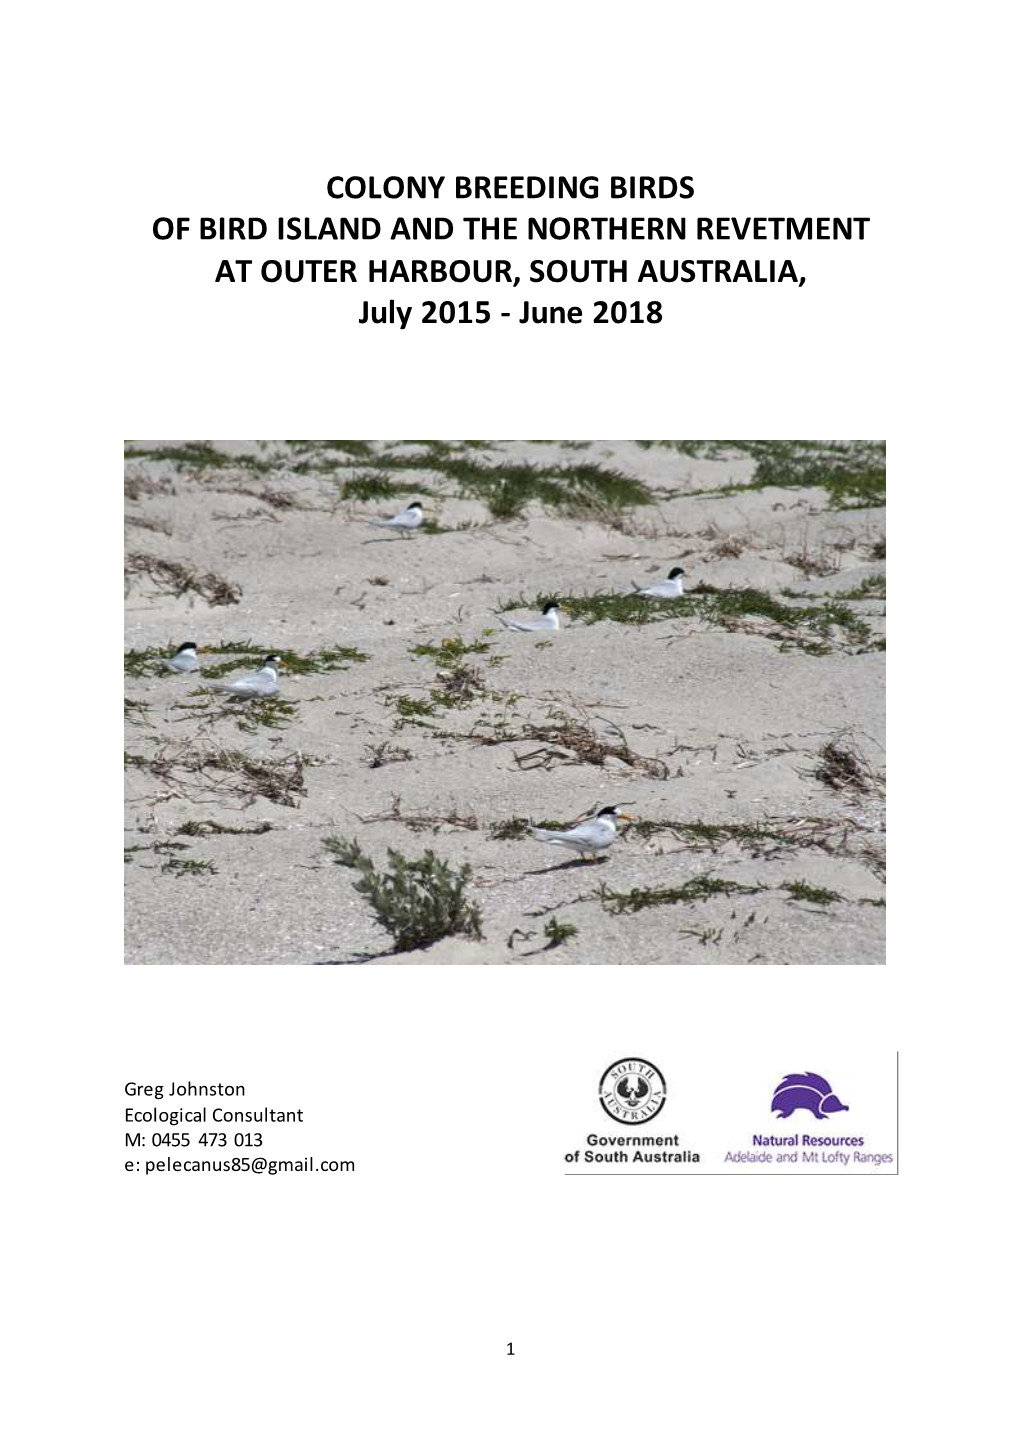 COLONY BREEDING BIRDS of BIRD ISLAND and the NORTHERN REVETMENT at OUTER HARBOUR, SOUTH AUSTRALIA, July 2015 - June 2018